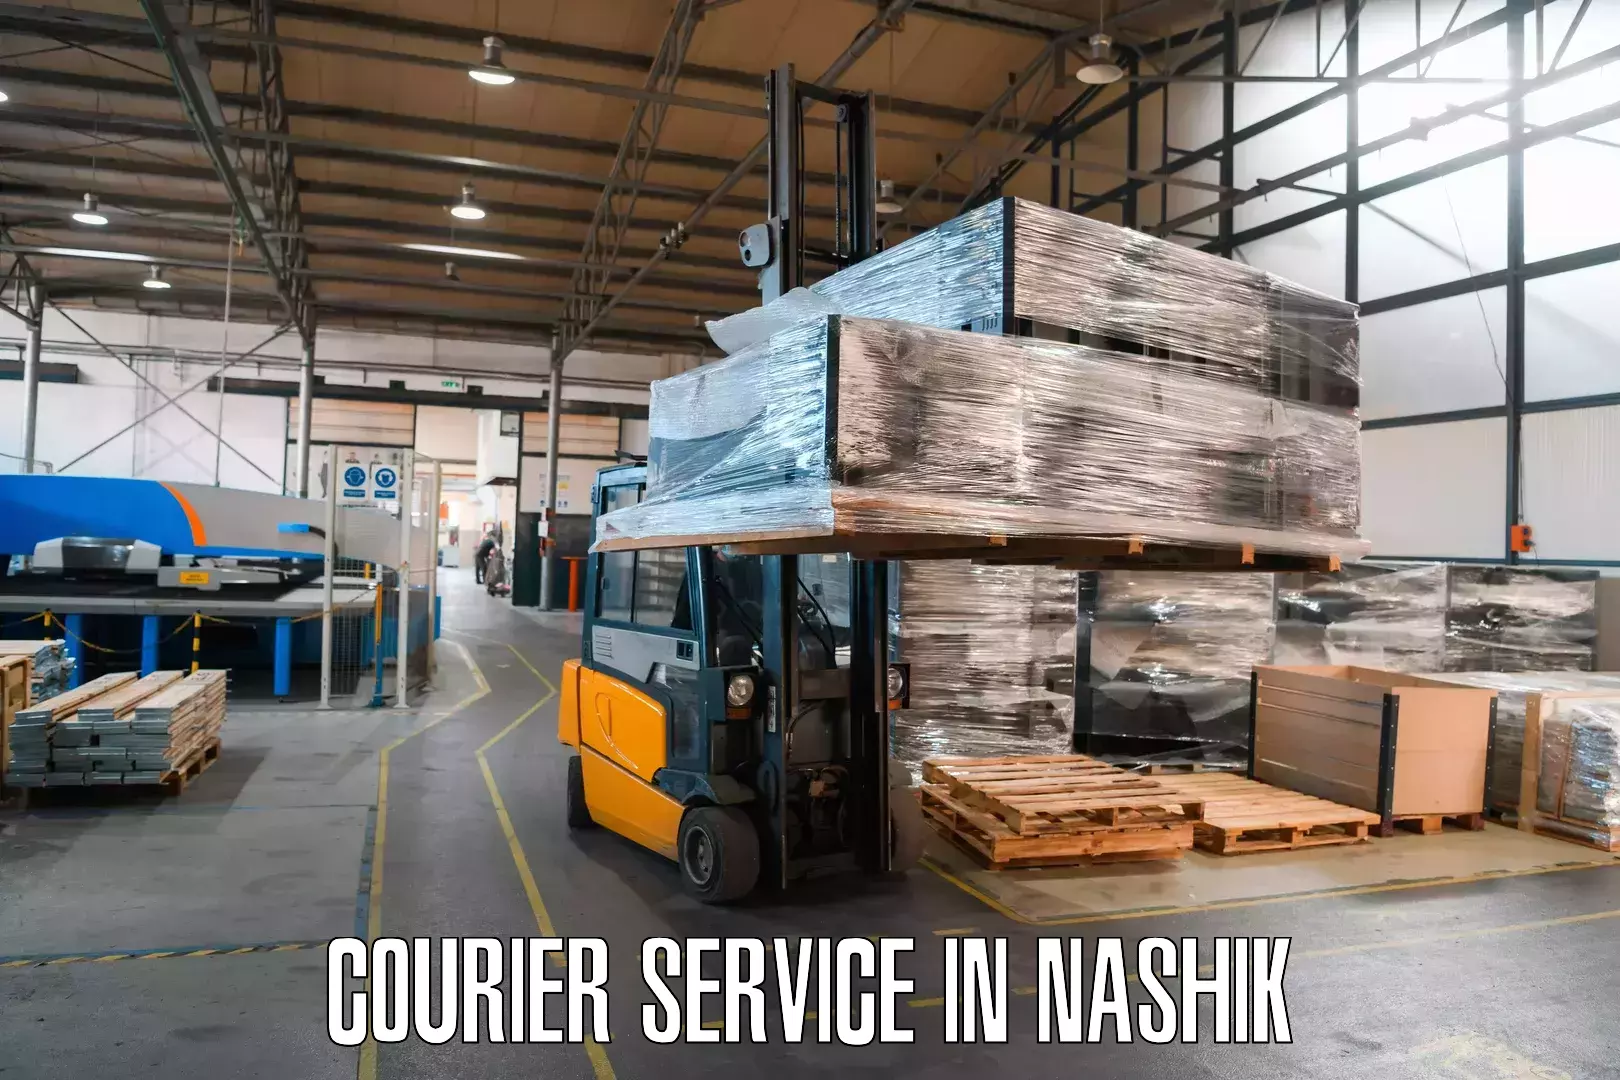 Enhanced tracking features in Nashik